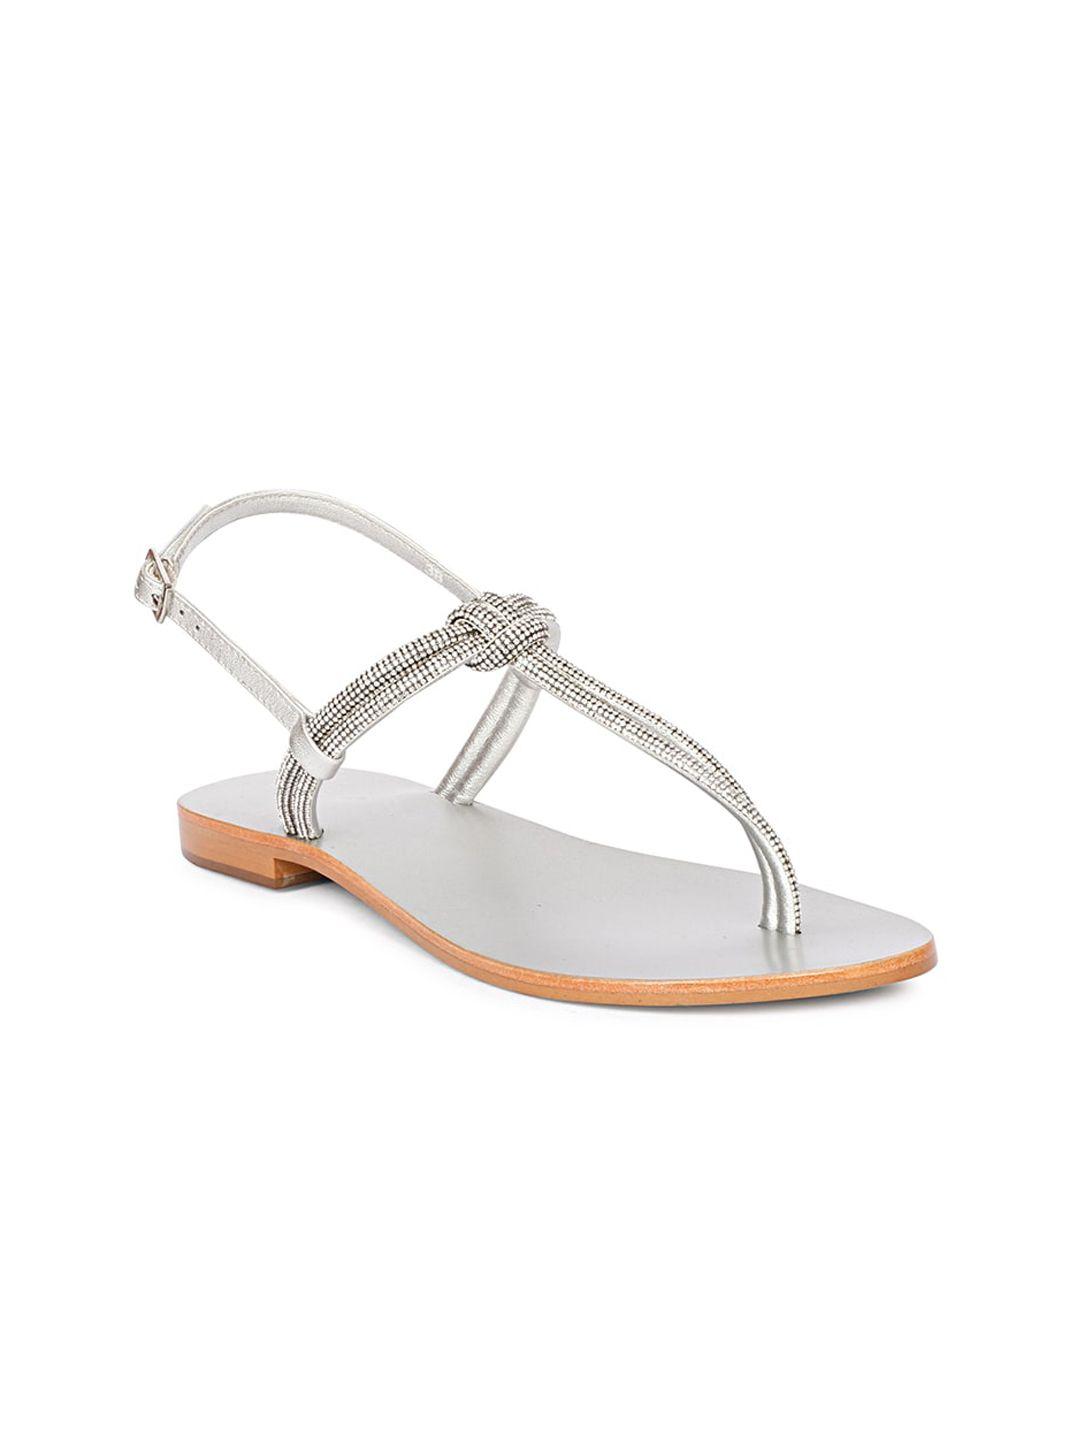 saint g embellished leather t-strap flats with buckle closure